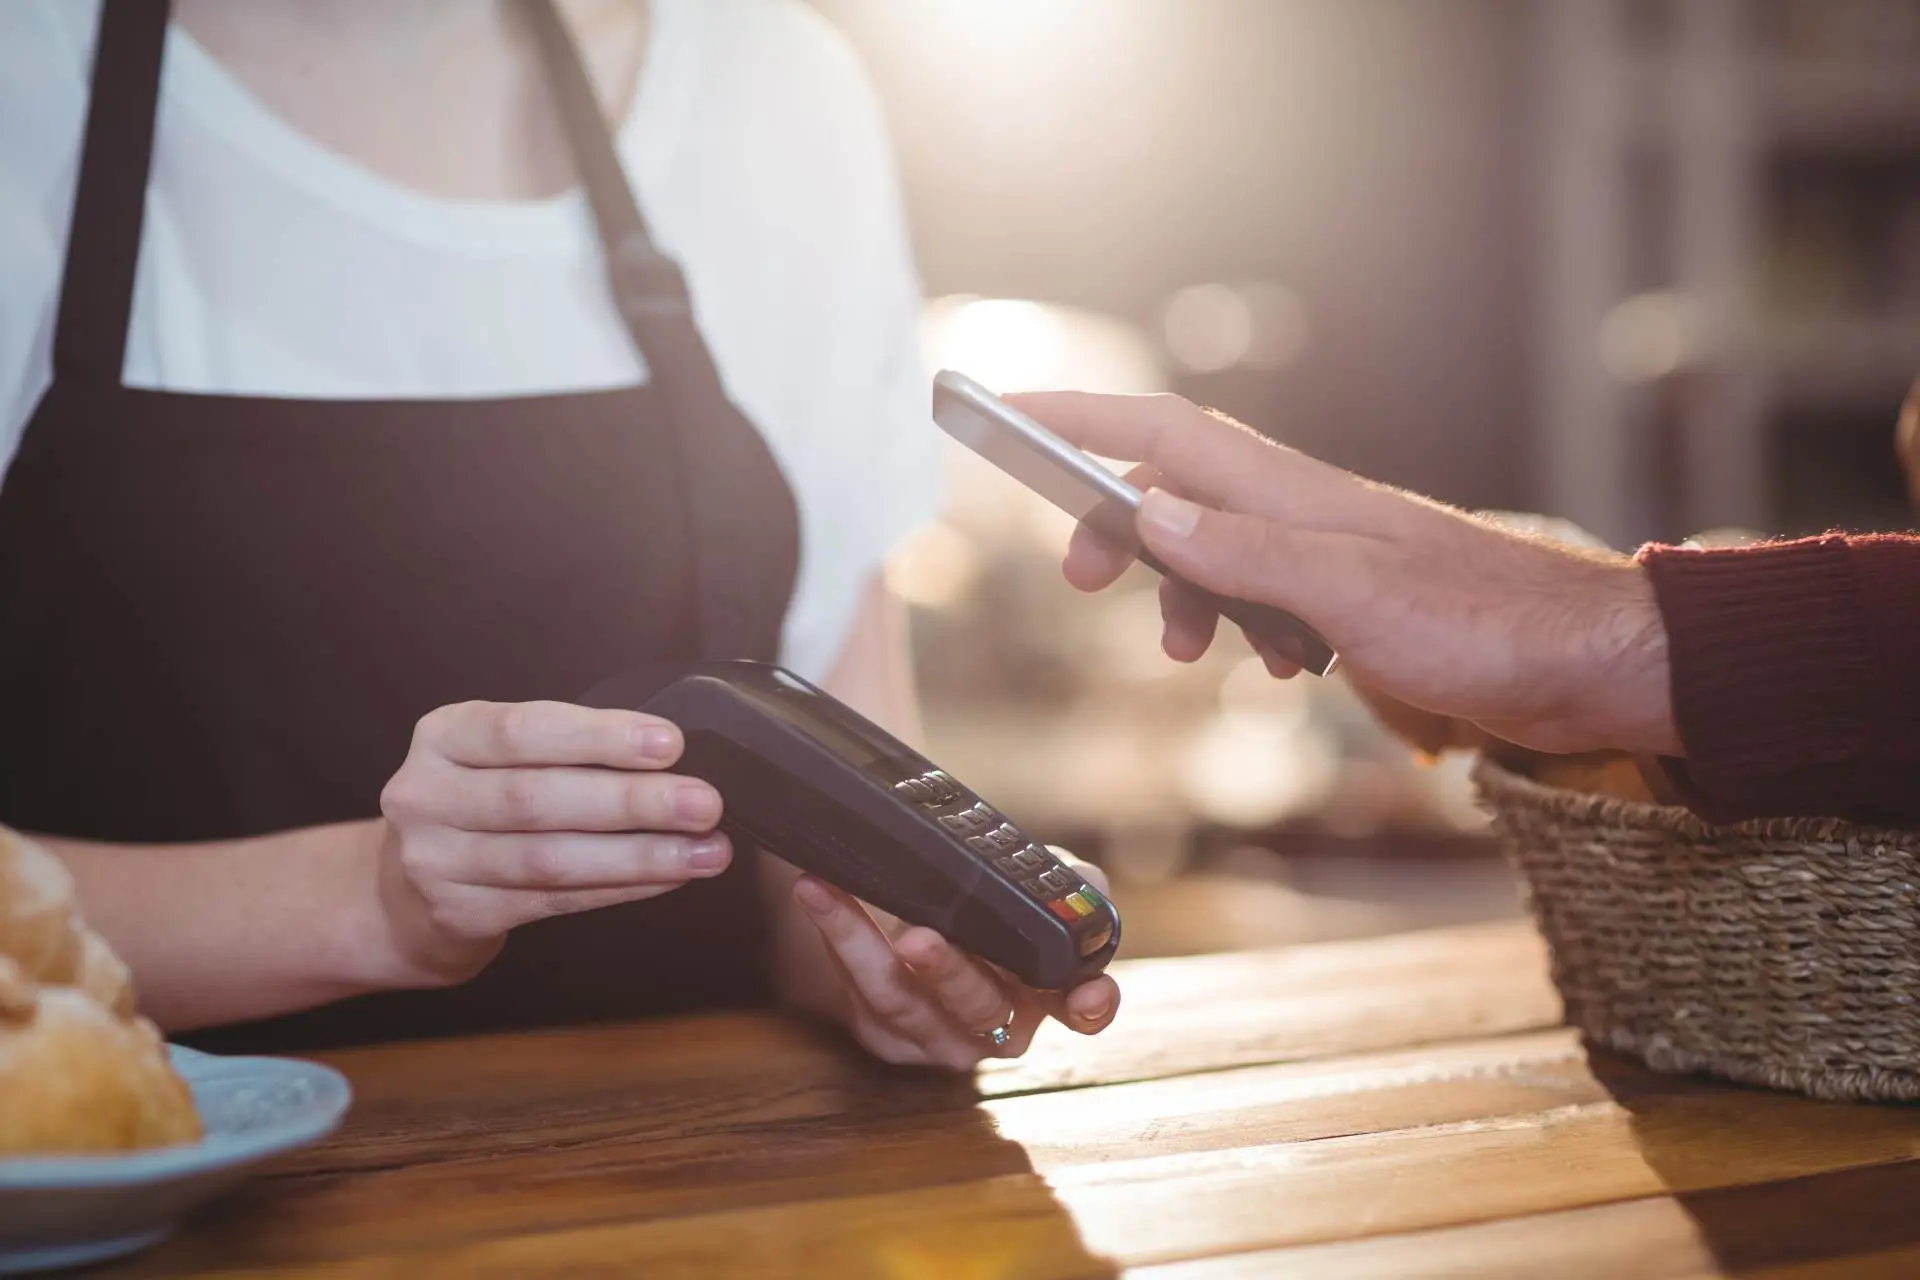 hospitality business owner delivering exceptional customer experience using POS device to accept payment